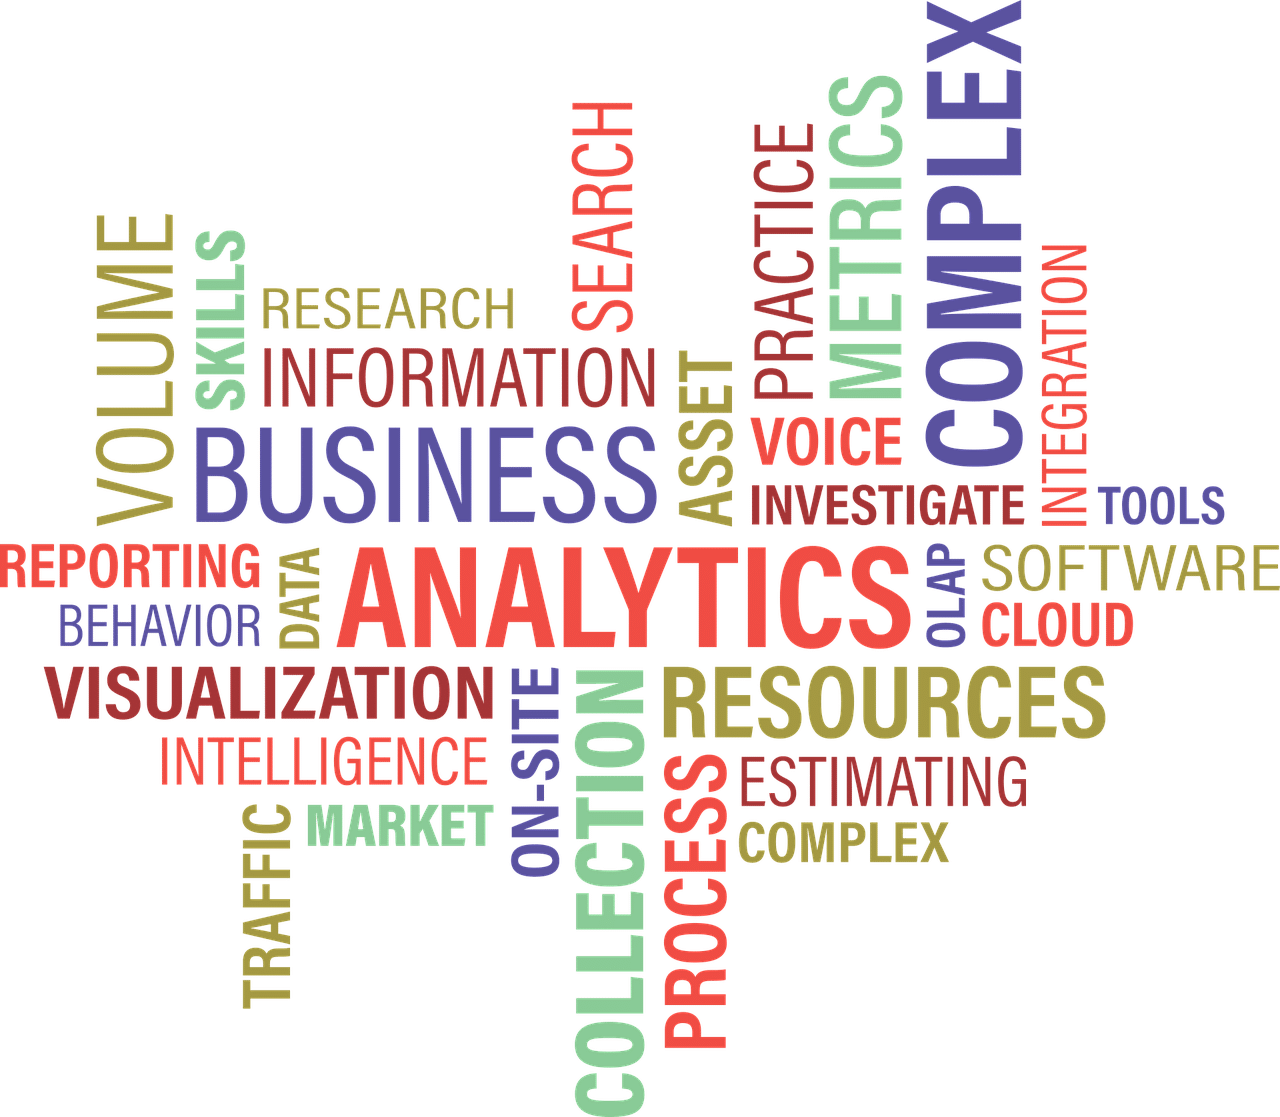 best analytic tools for business analysis